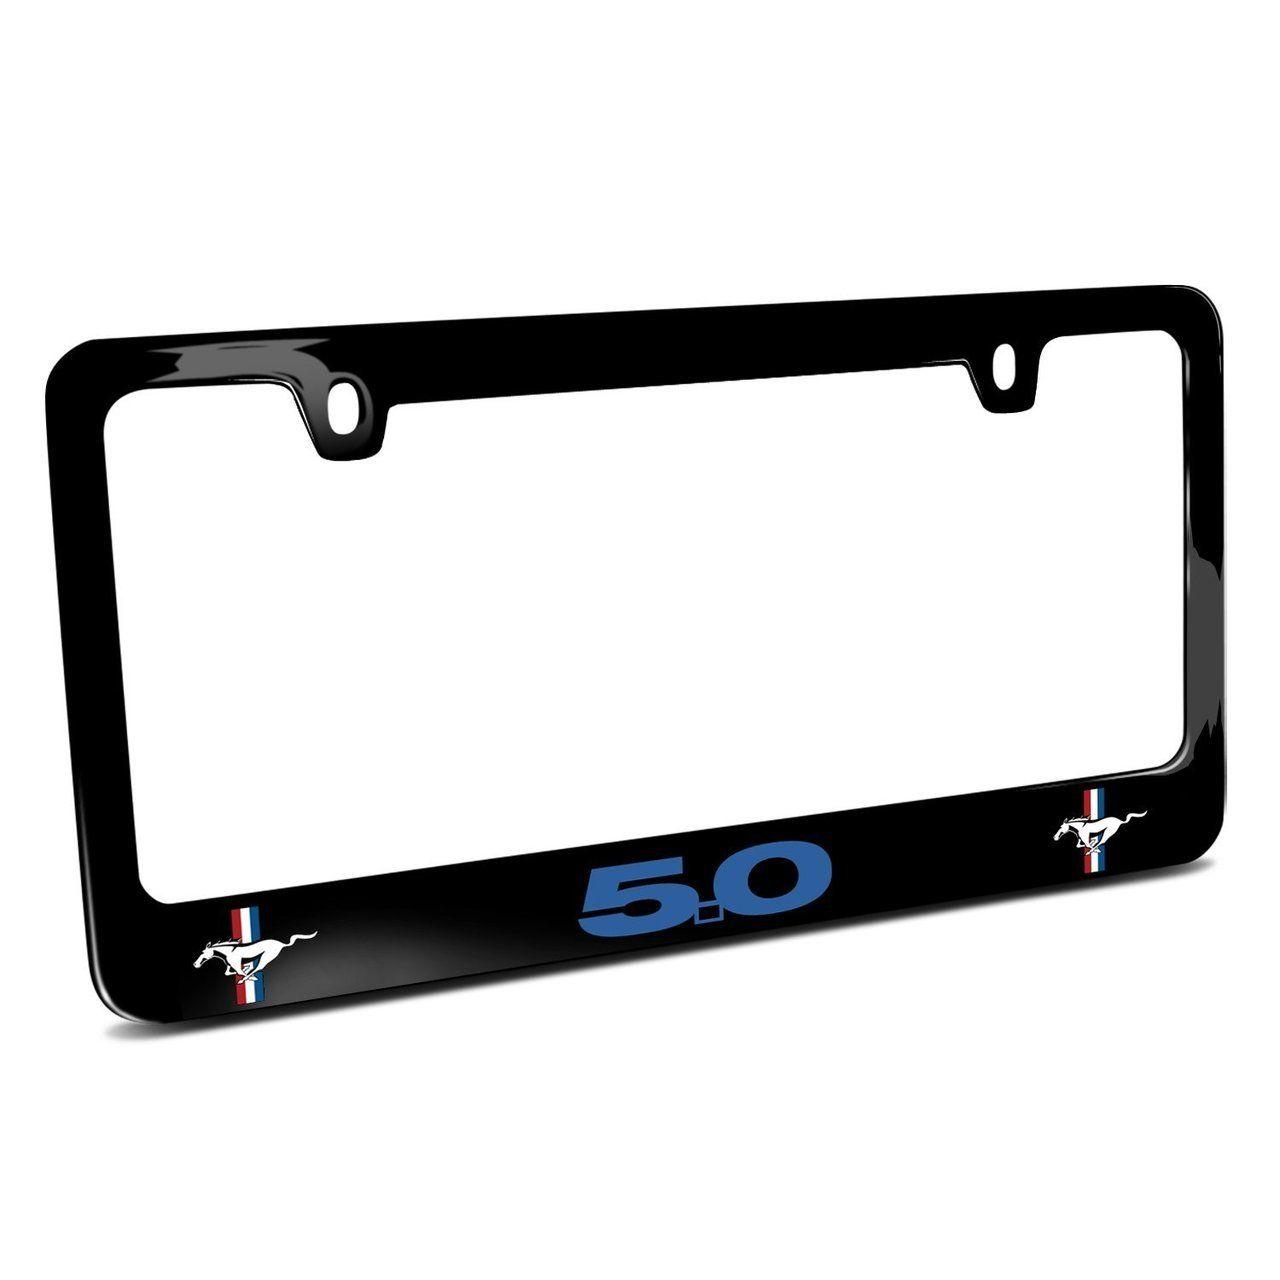 Blue and Black GT Logo - Ford Mustang GT 5.0 in Blue Dual Logos Black Metal License Plate ...